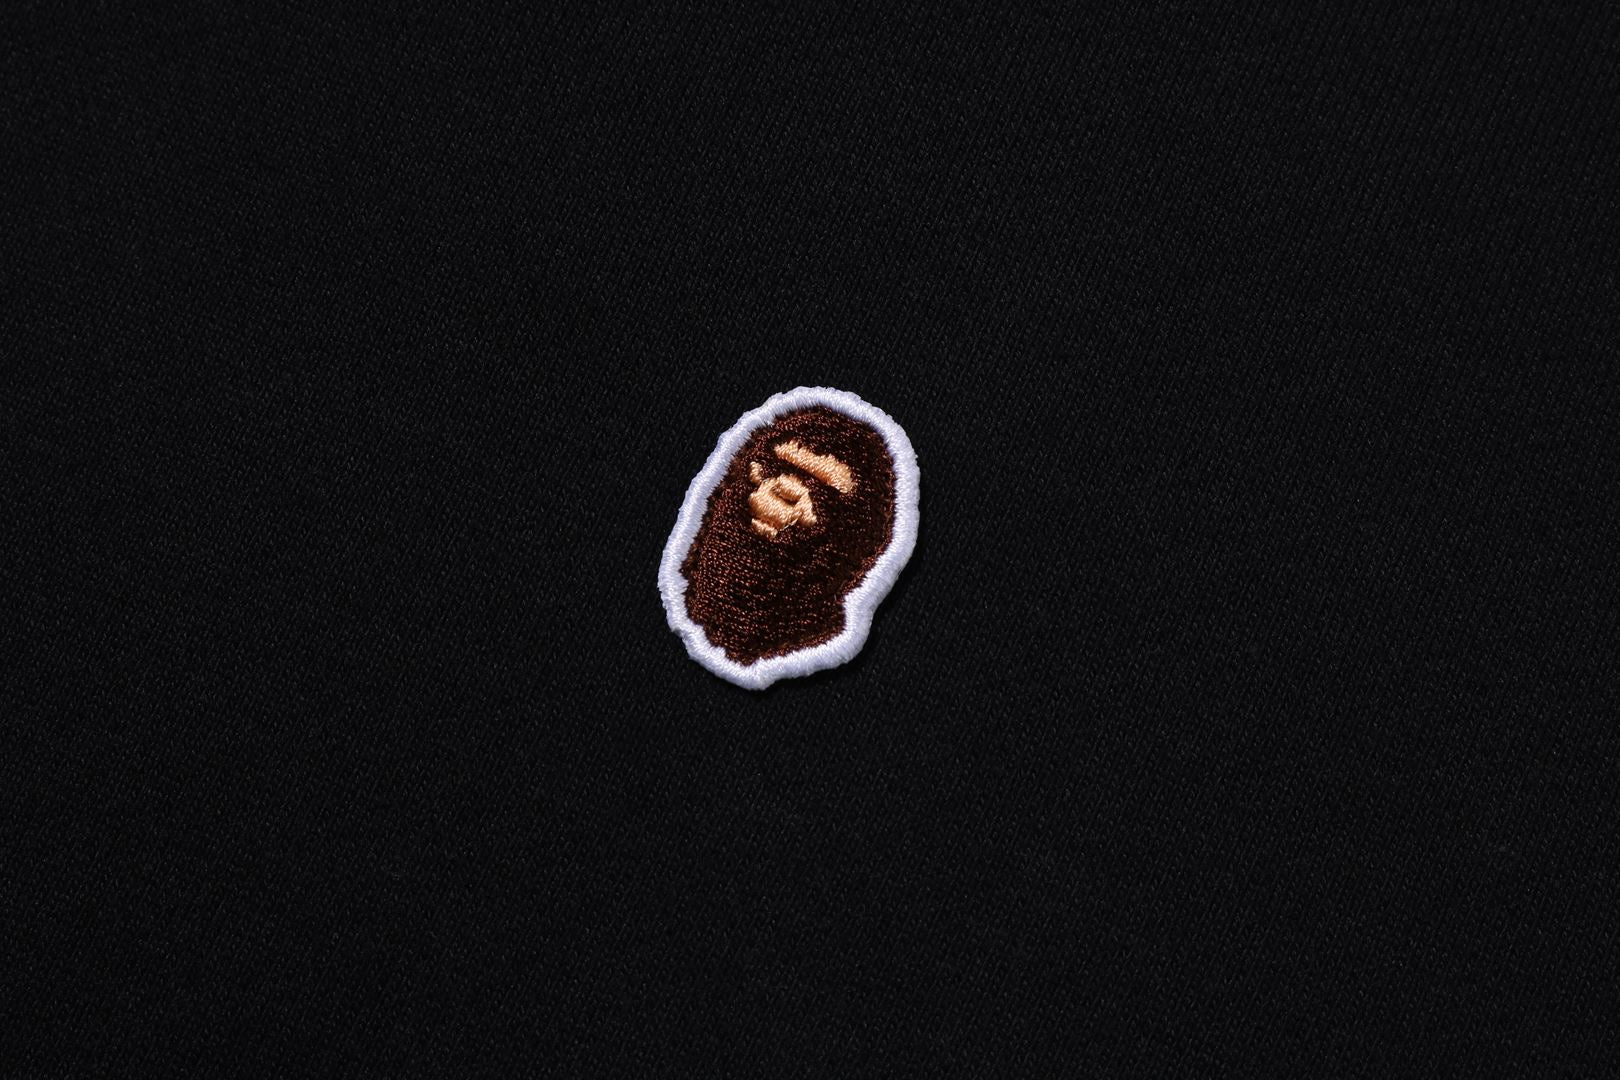 APE HEAD ONE POINT RELAXED FIT PULLOVER HOODIE – uk.bape.com